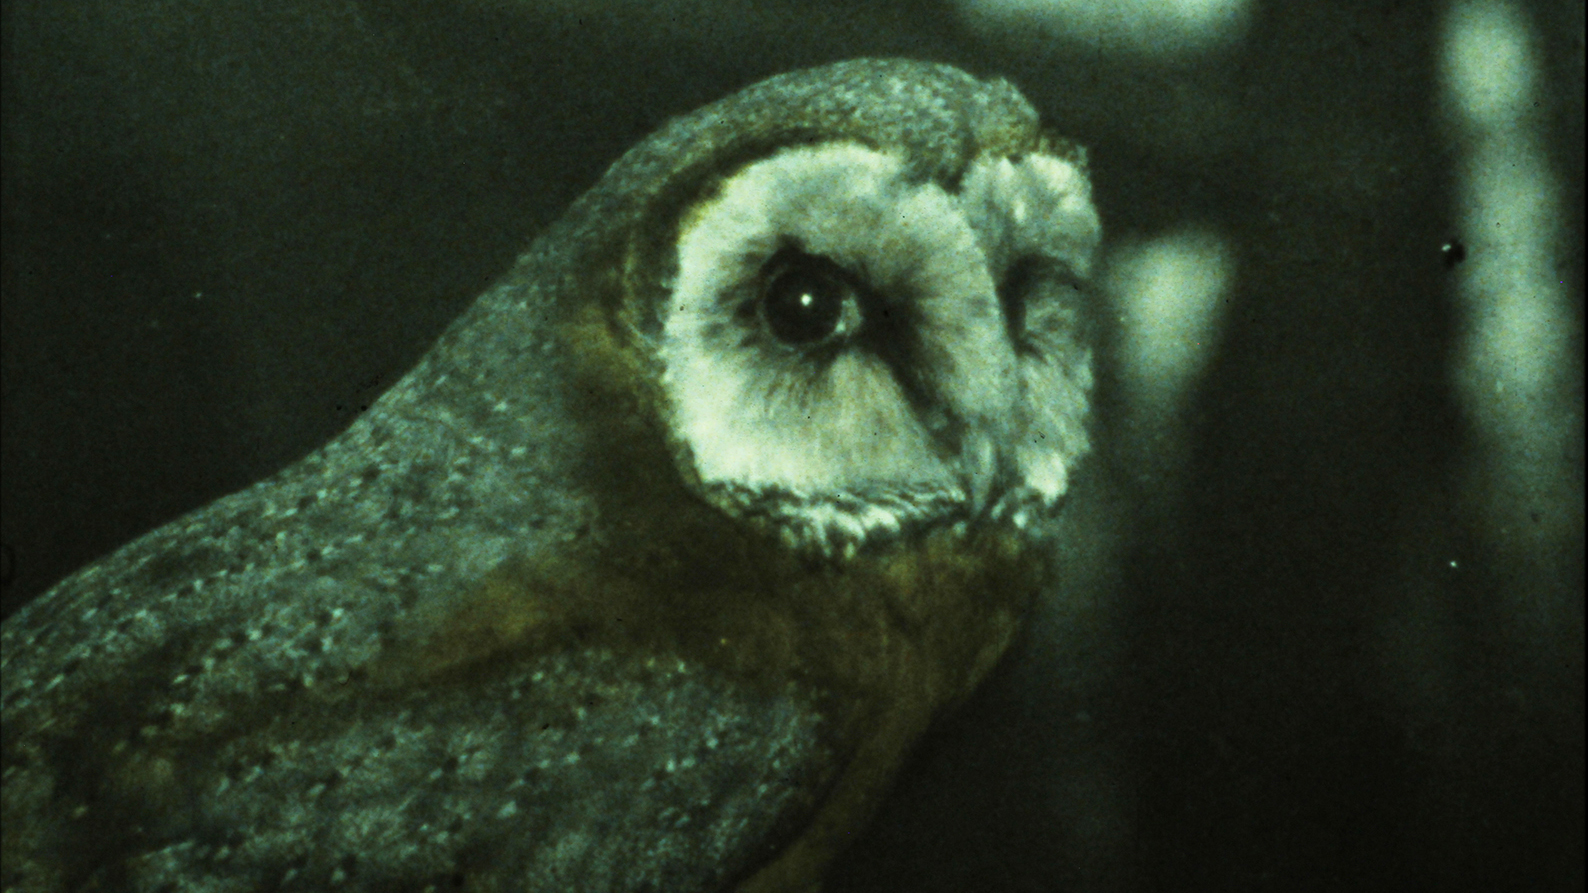 A green-toned photo of a close up of an owl staring at the camera outside.